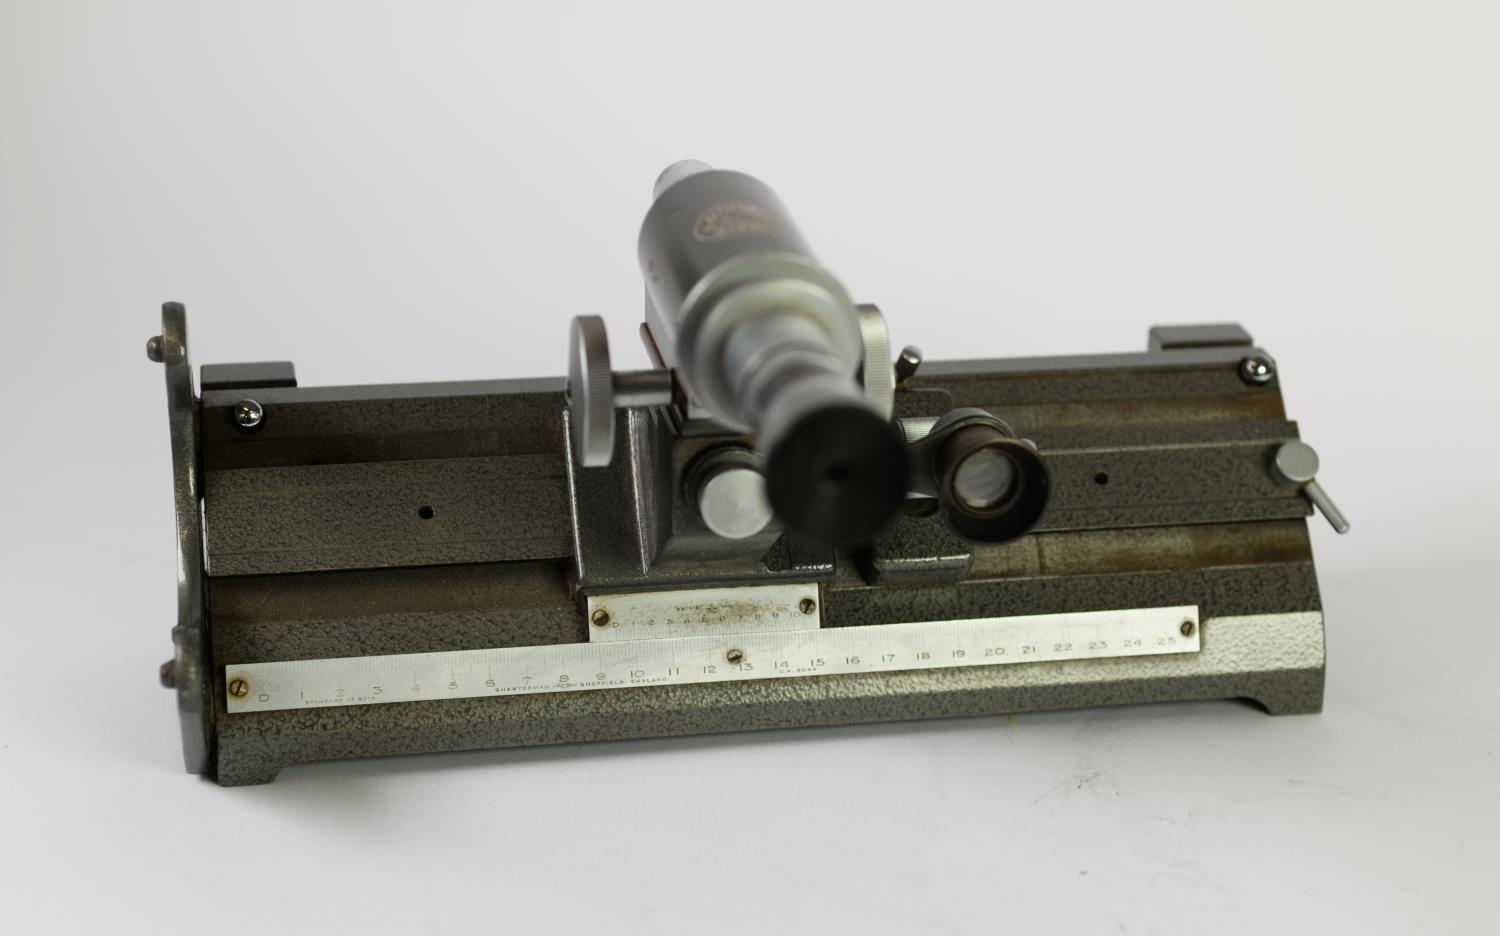 C. BAKER, LONDON, TRAVELLING PRECISION ENGINEERING VERNIER, MICROSCOPE, heavy cast metal with - Image 4 of 4